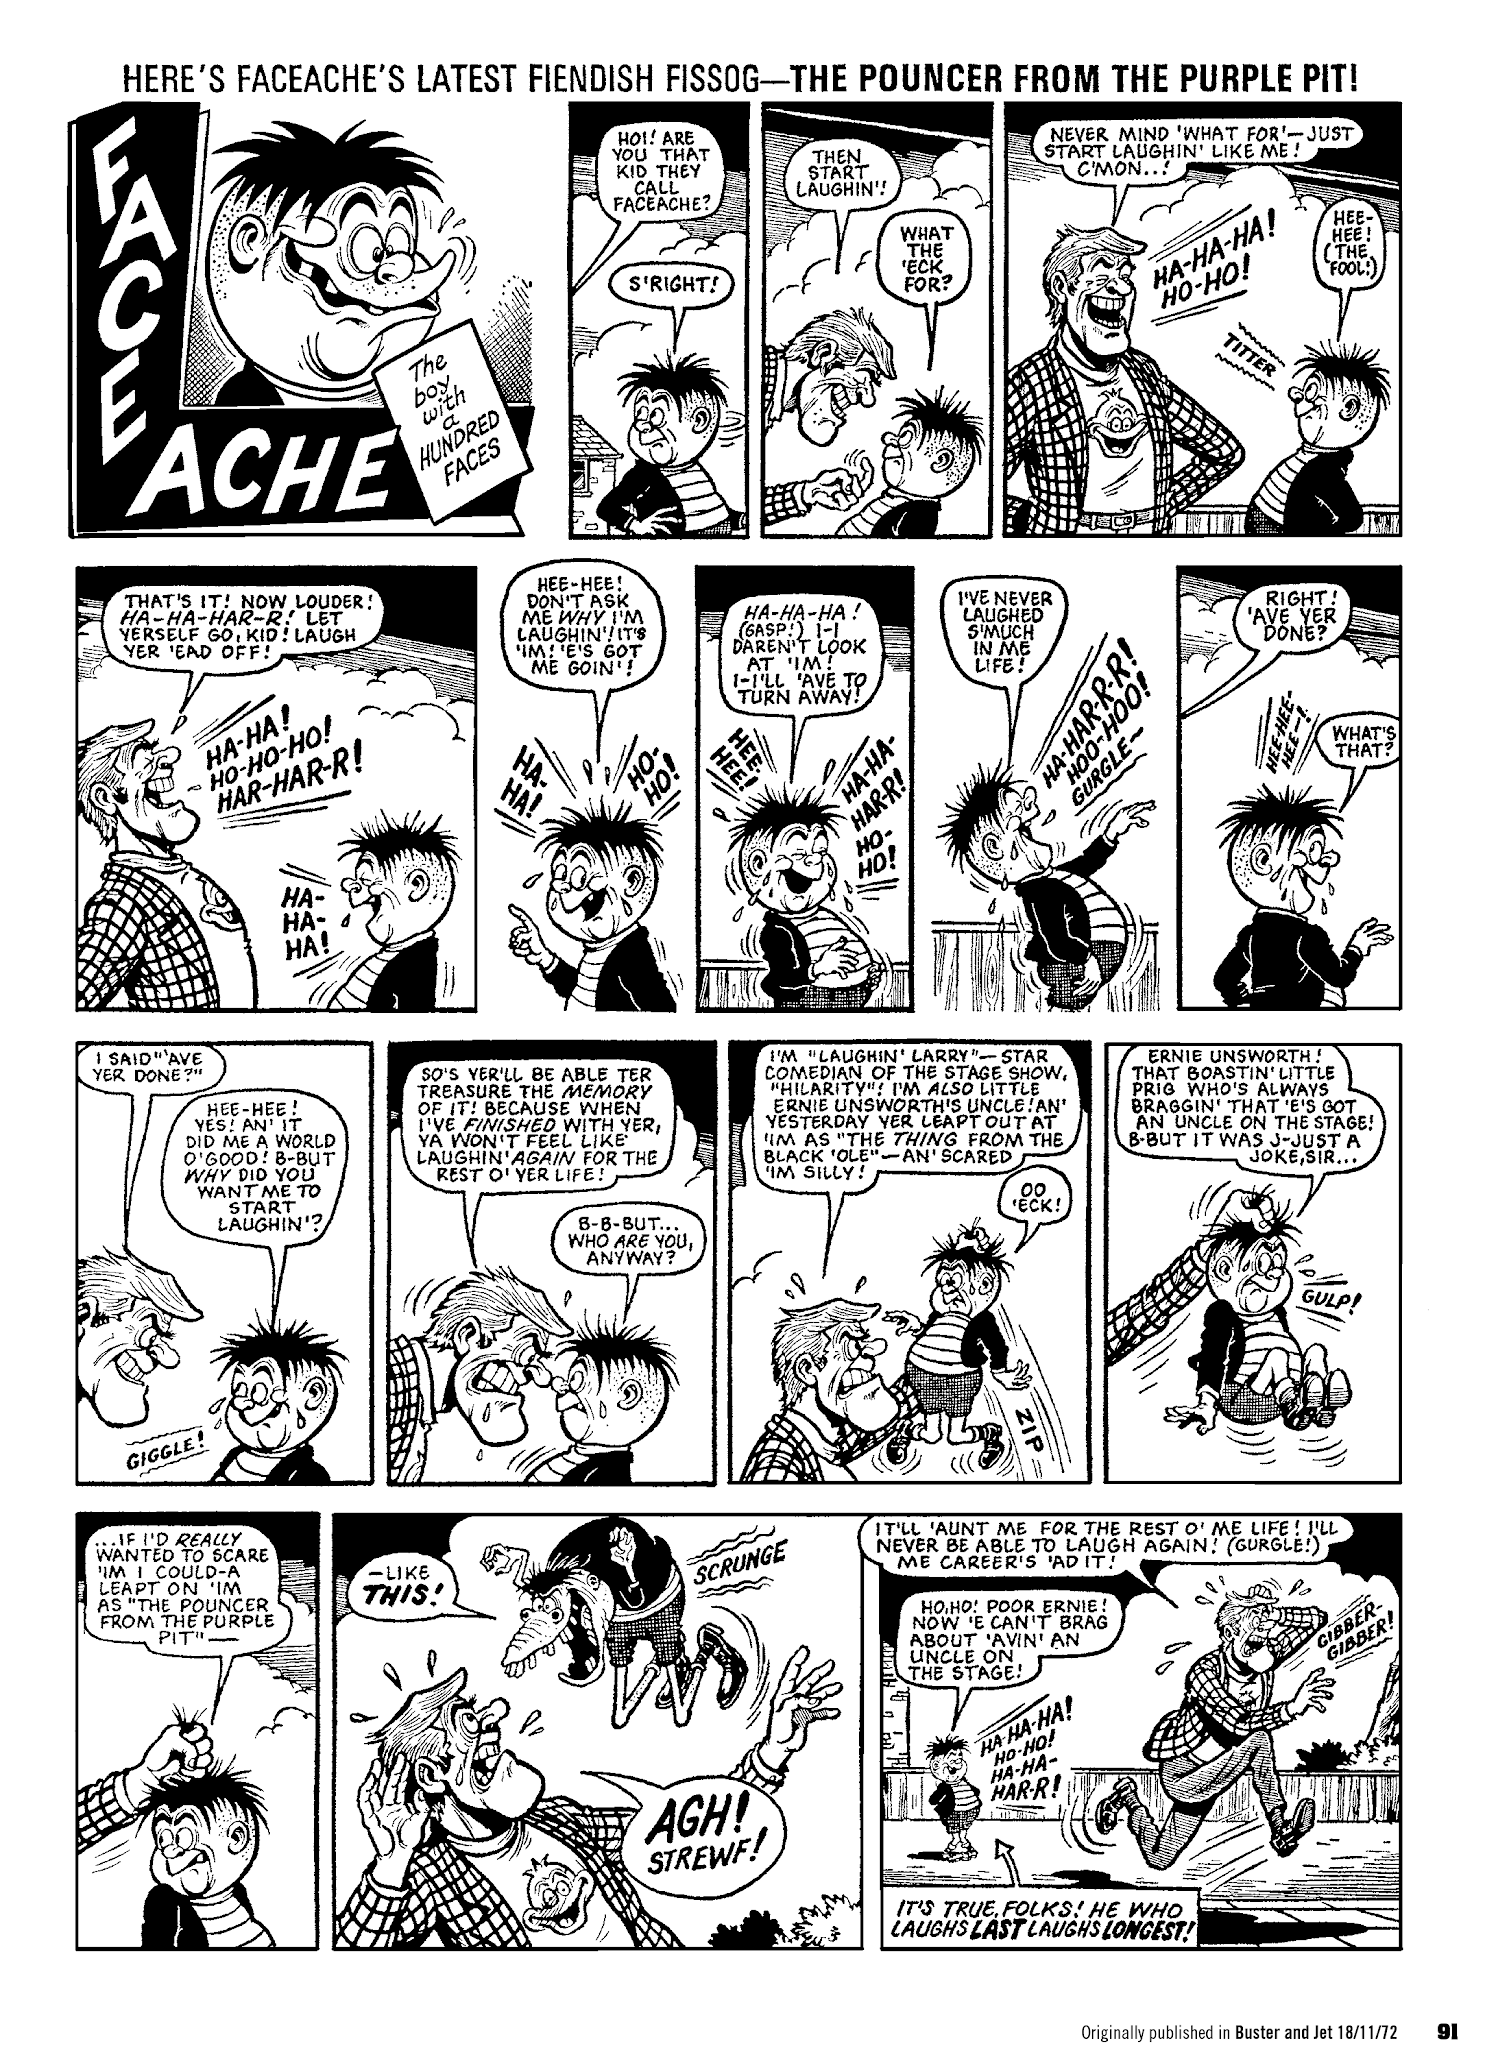 Read online Faceache: The First Hundred Scrunges comic -  Issue # TPB 1 - 93